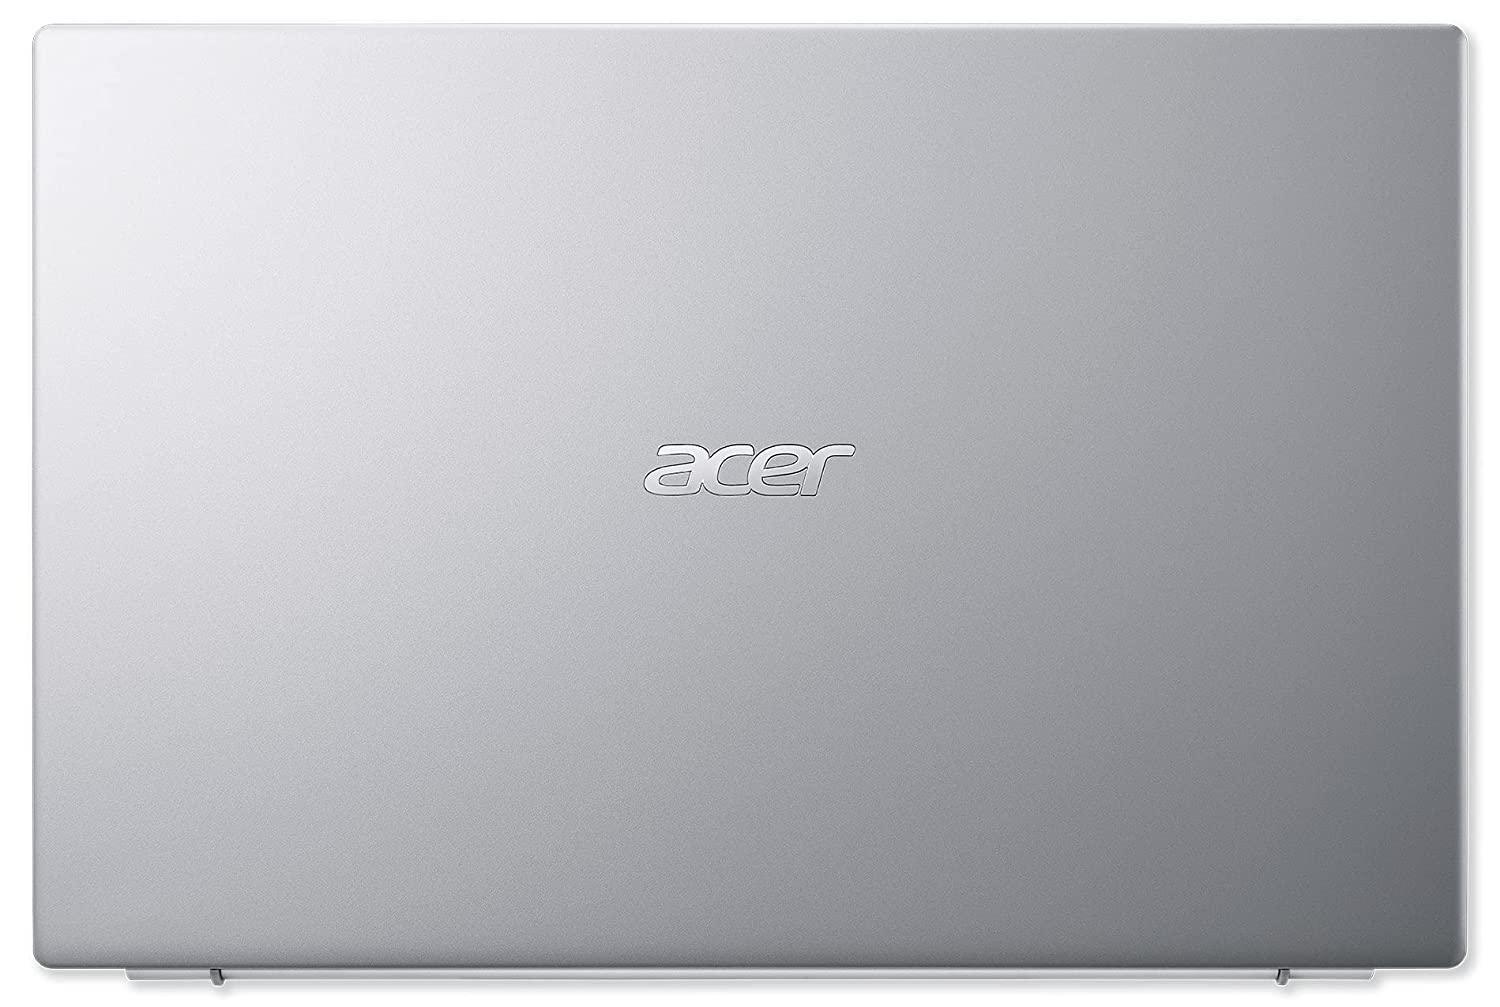 Acer Aspire 3 Intel 11th Gen Core i3 Laptop 15.6-inch Full HD (1920x1080) Anti-Glare Display - Silver A315-58 - Store For Gamers